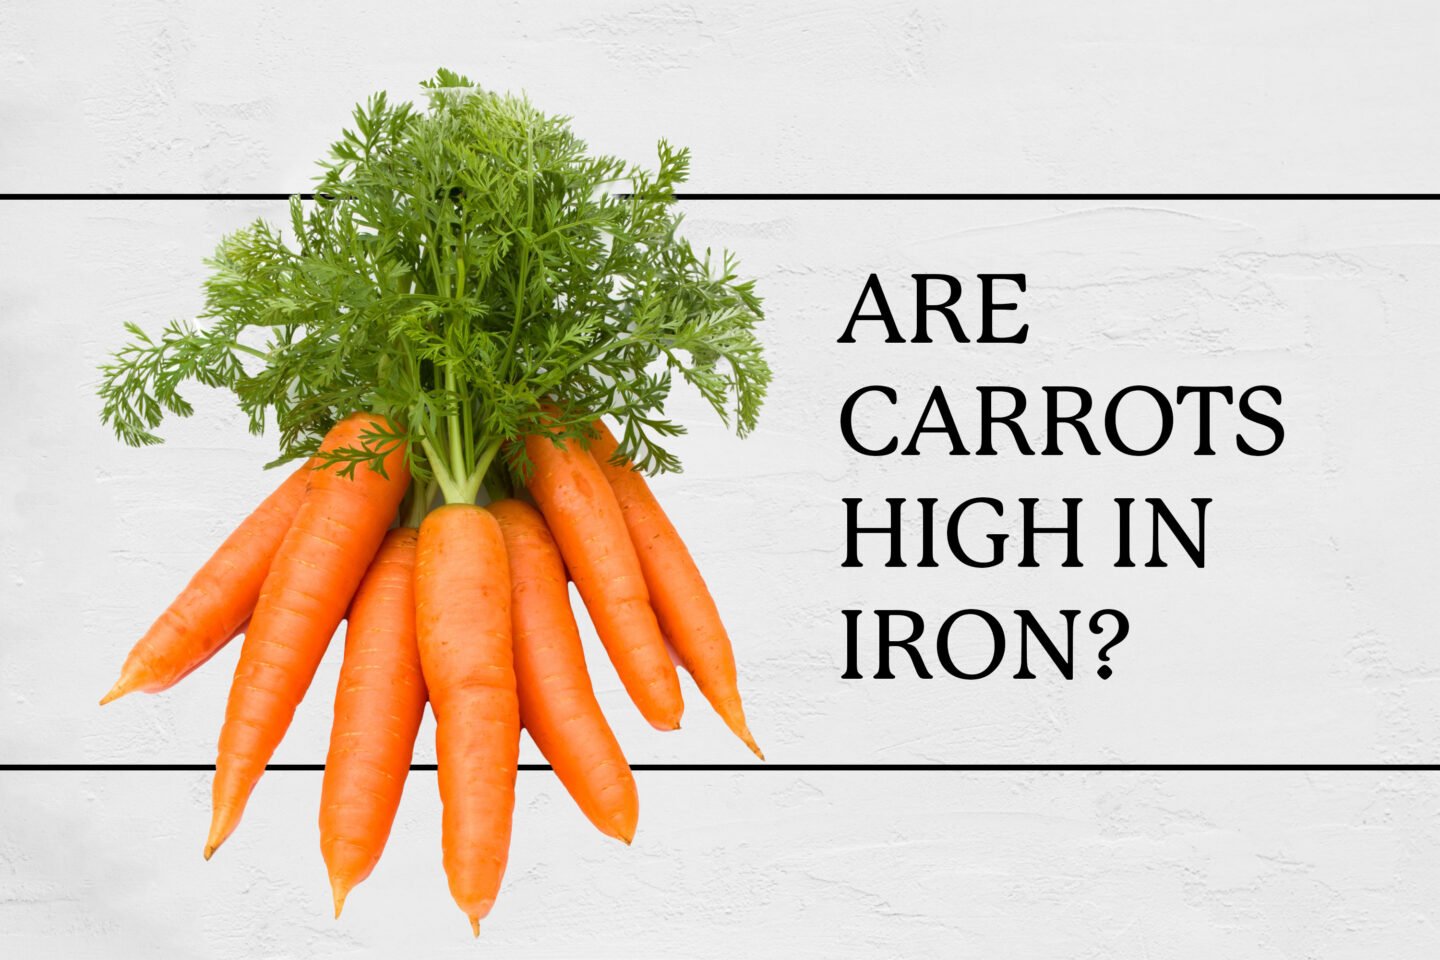 carrots rich in iron